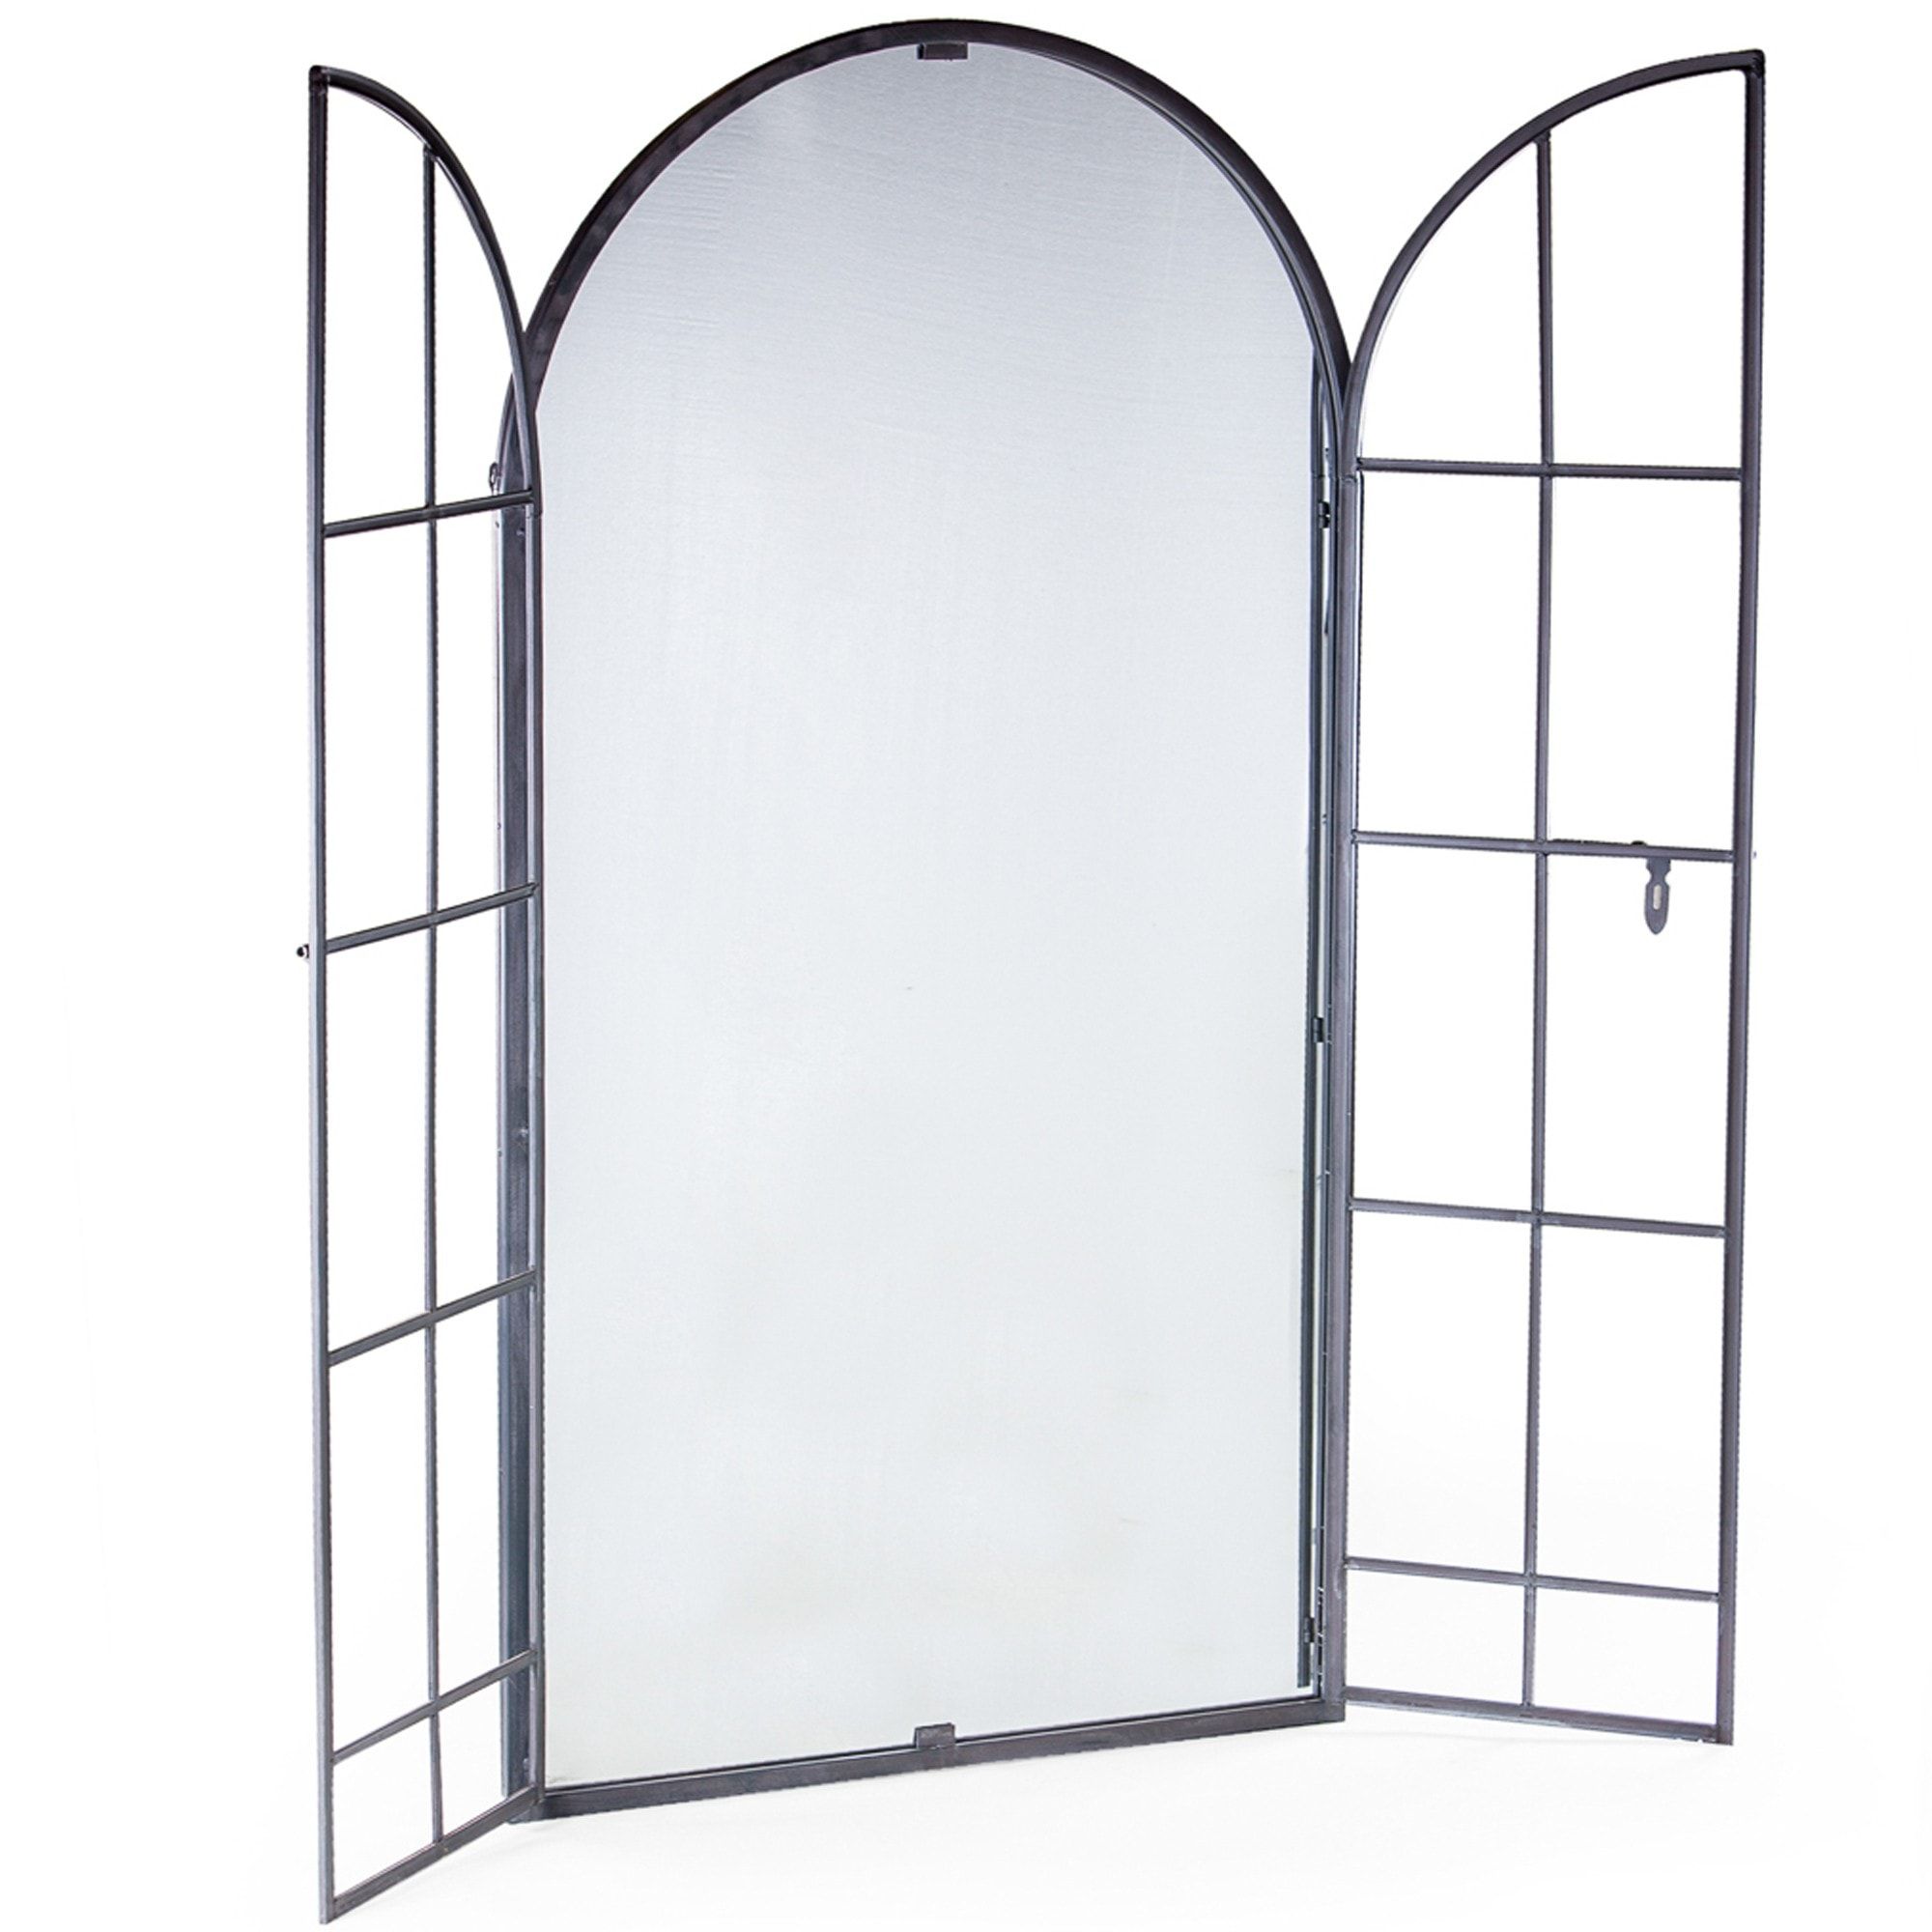 Antiqued Lead Grey Iron Large Arch Window Metal Mirror | Metal Mirror Within Metal Arch Window Wall Mirrors (View 5 of 15)